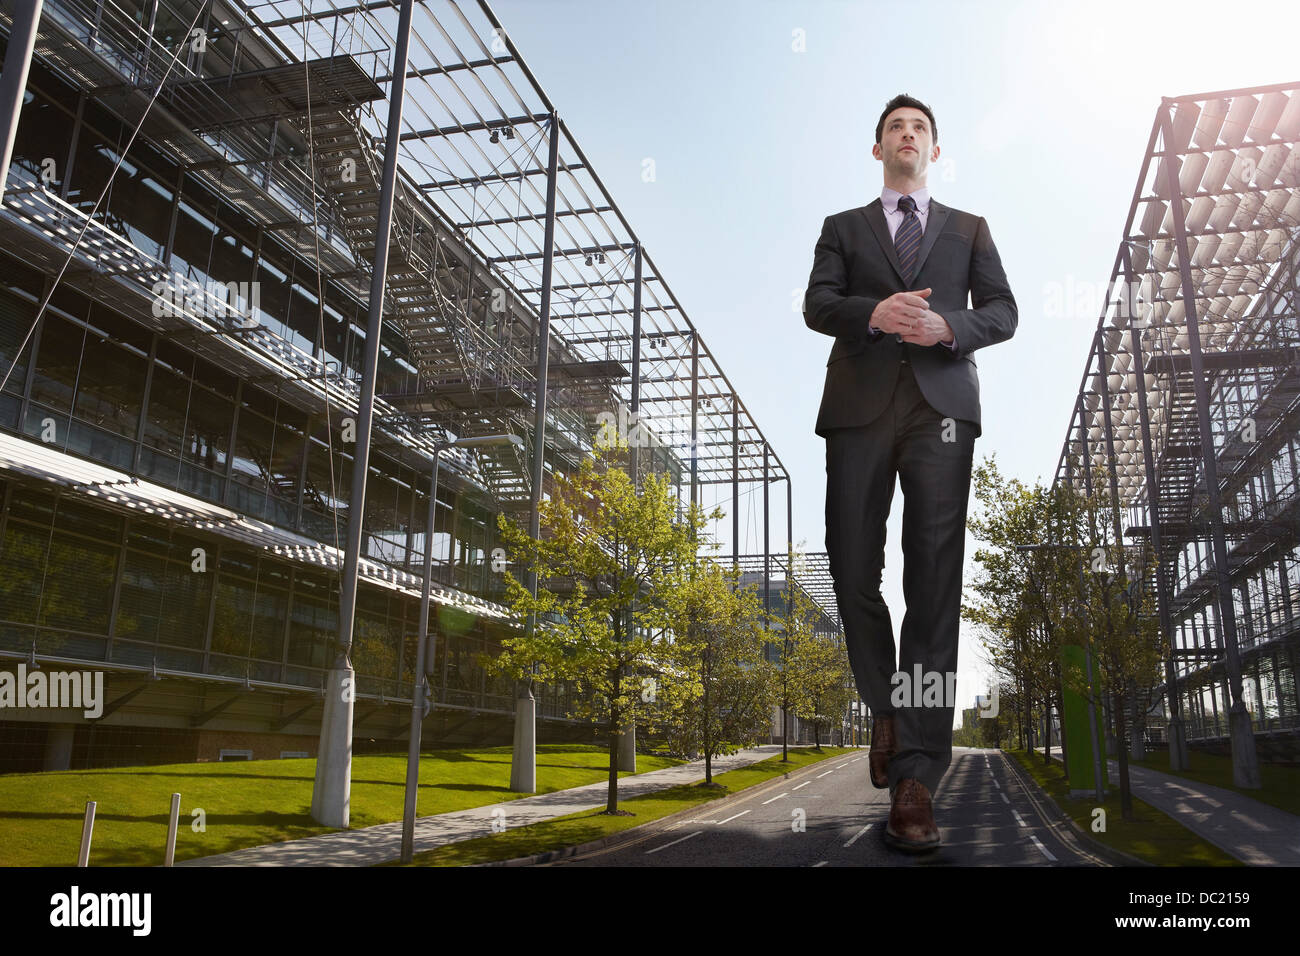 Oversized businessman walking on road, low angle view Stock Photo